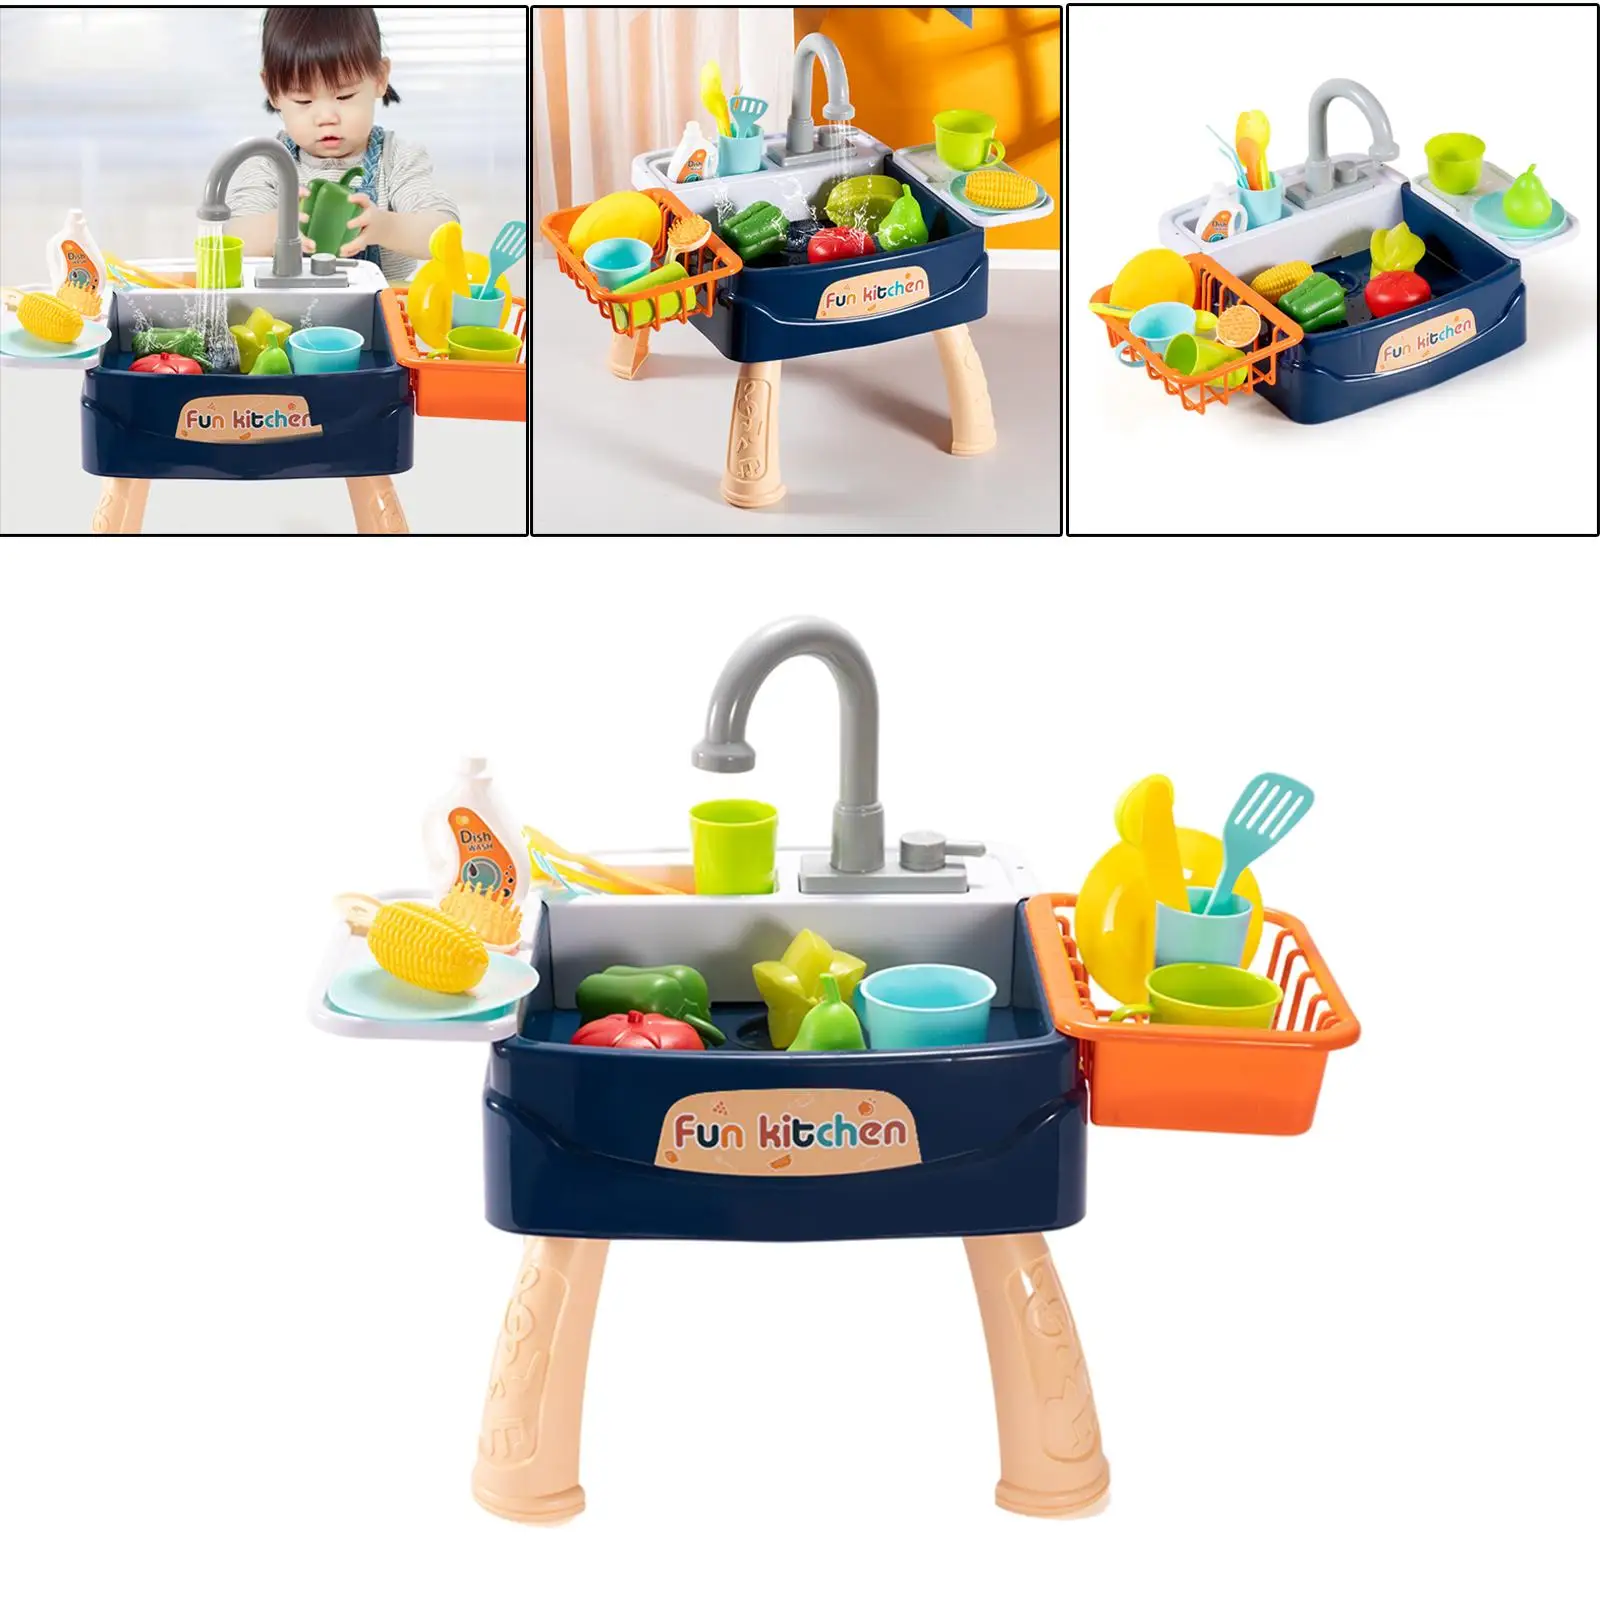 Automatic Children Simulation Kitchen Toys Sink Toys Playhouse Pretend Play Activity Fruits And Vegetables Dishes Sink Set